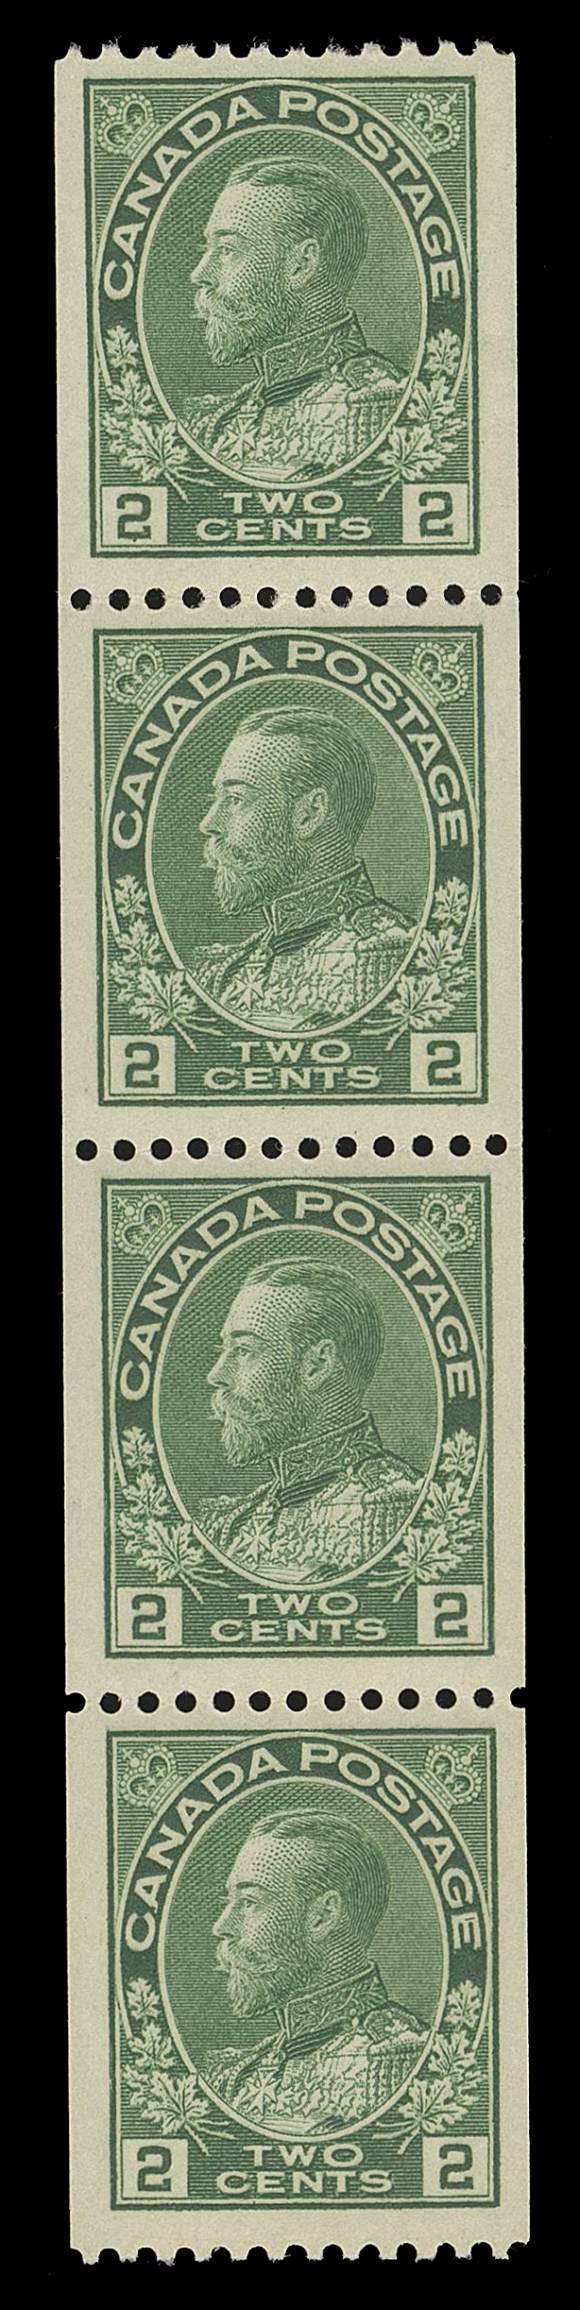 CANADA -  8 KING GEORGE V  131-134,A beautiful set of selected mint coil strips of four, all well centered and fresh; 2c carmine with corner bend, VF-XF NH